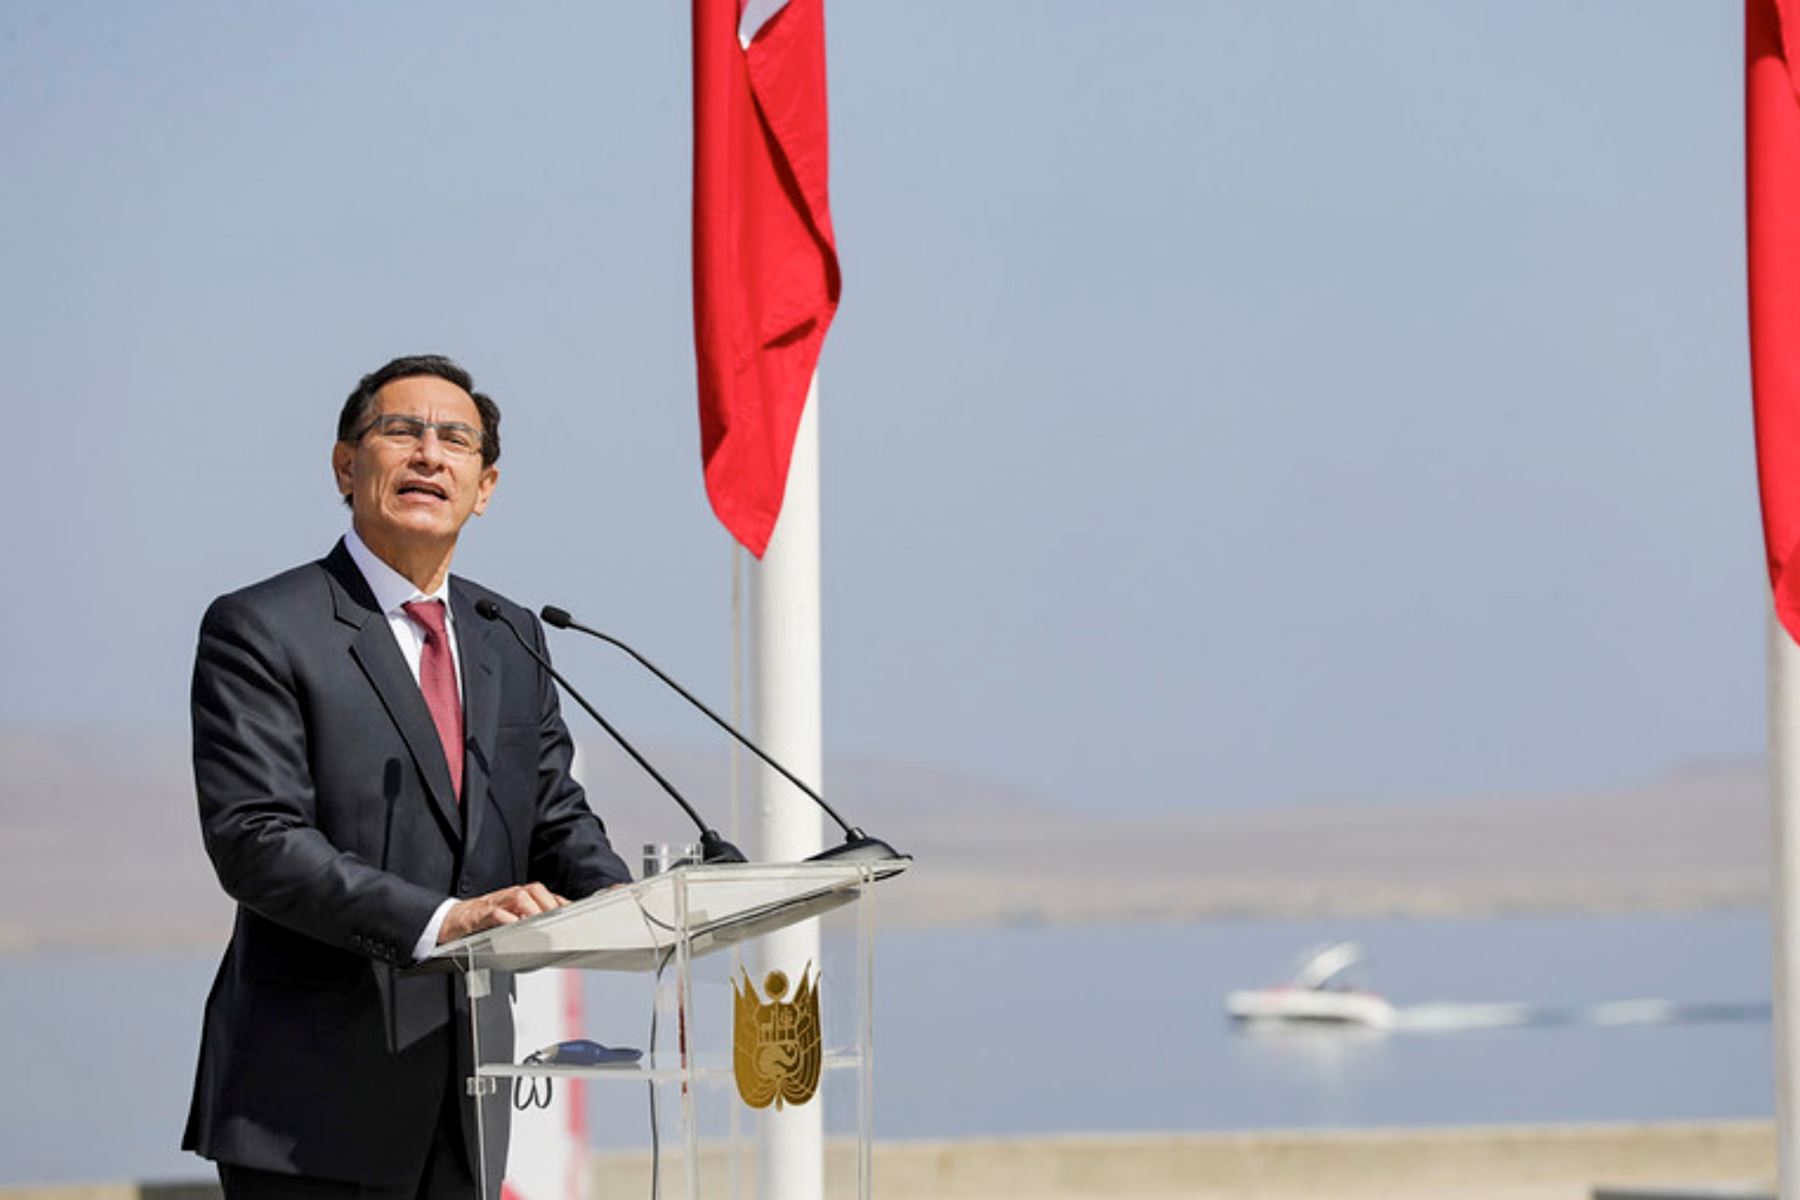 Peruvian President Martin Vizcarra leads the commemoration ceremony for the 200 years of the landing of General Don José de San Martín and the Liberation Expedition. Photo: ANDINA/Presidency of the Republic